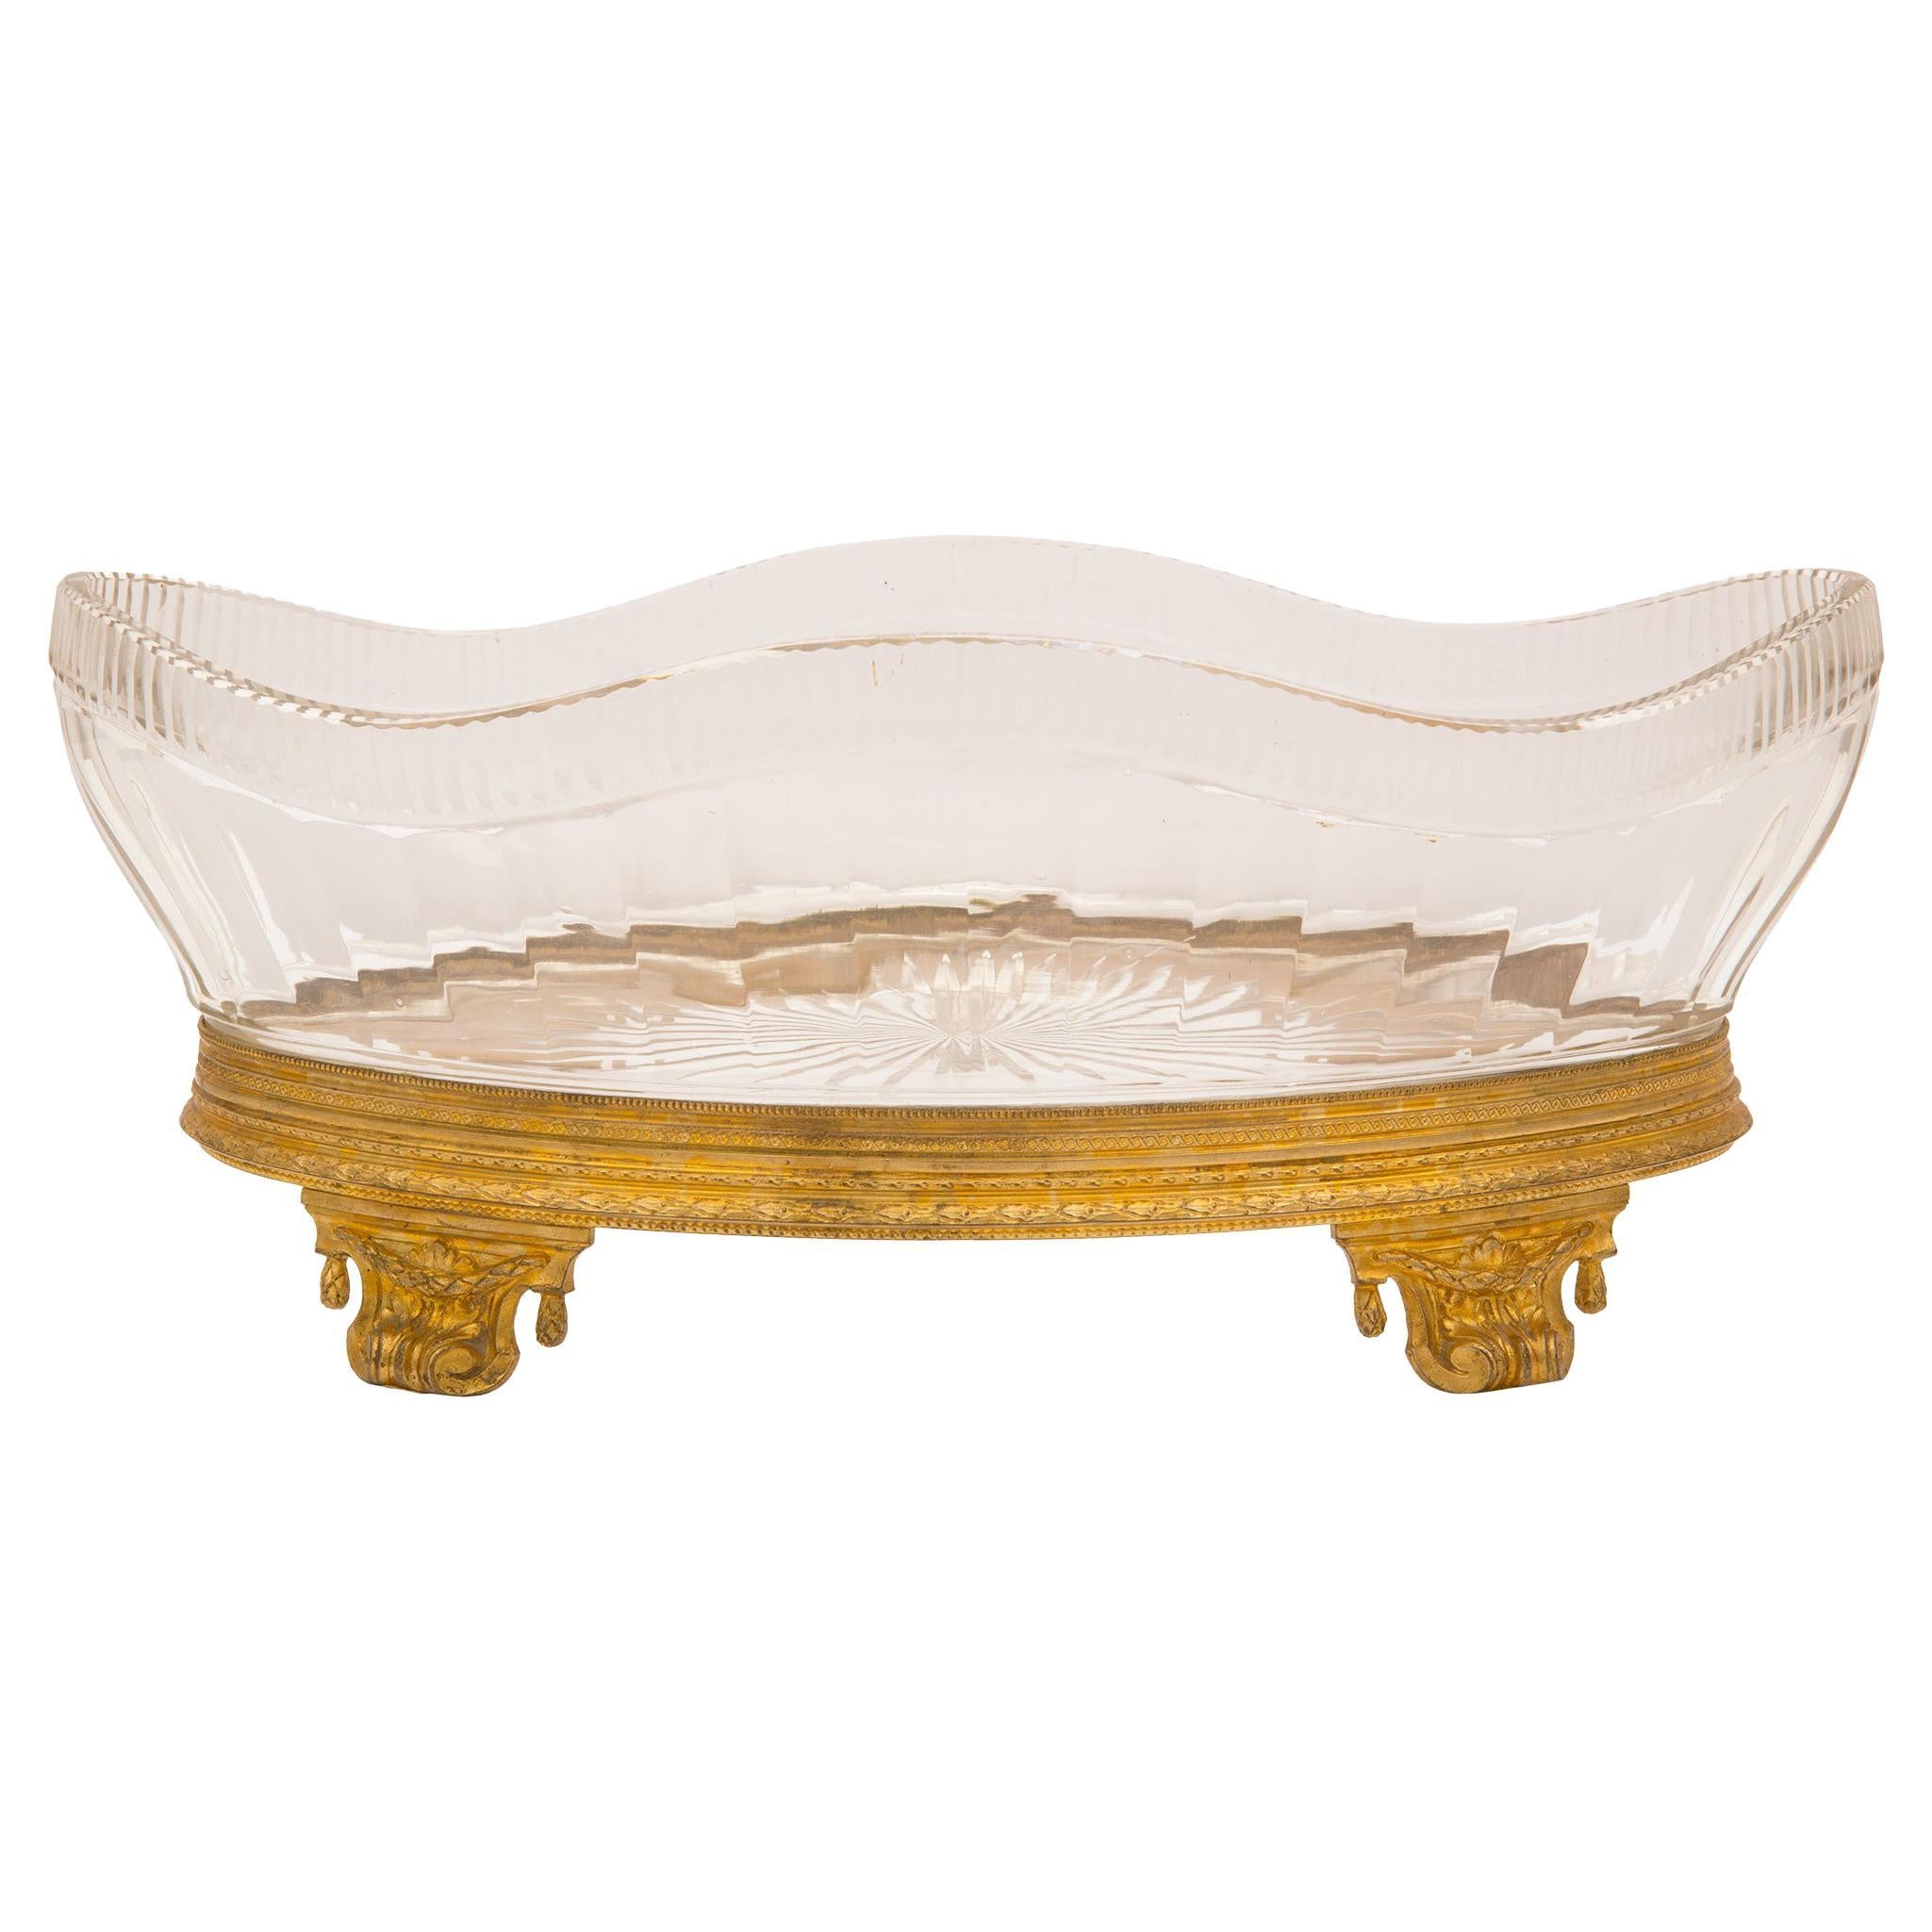 French 19th Century Louis XVI Style Oval Shaped Centerpiece Bowl